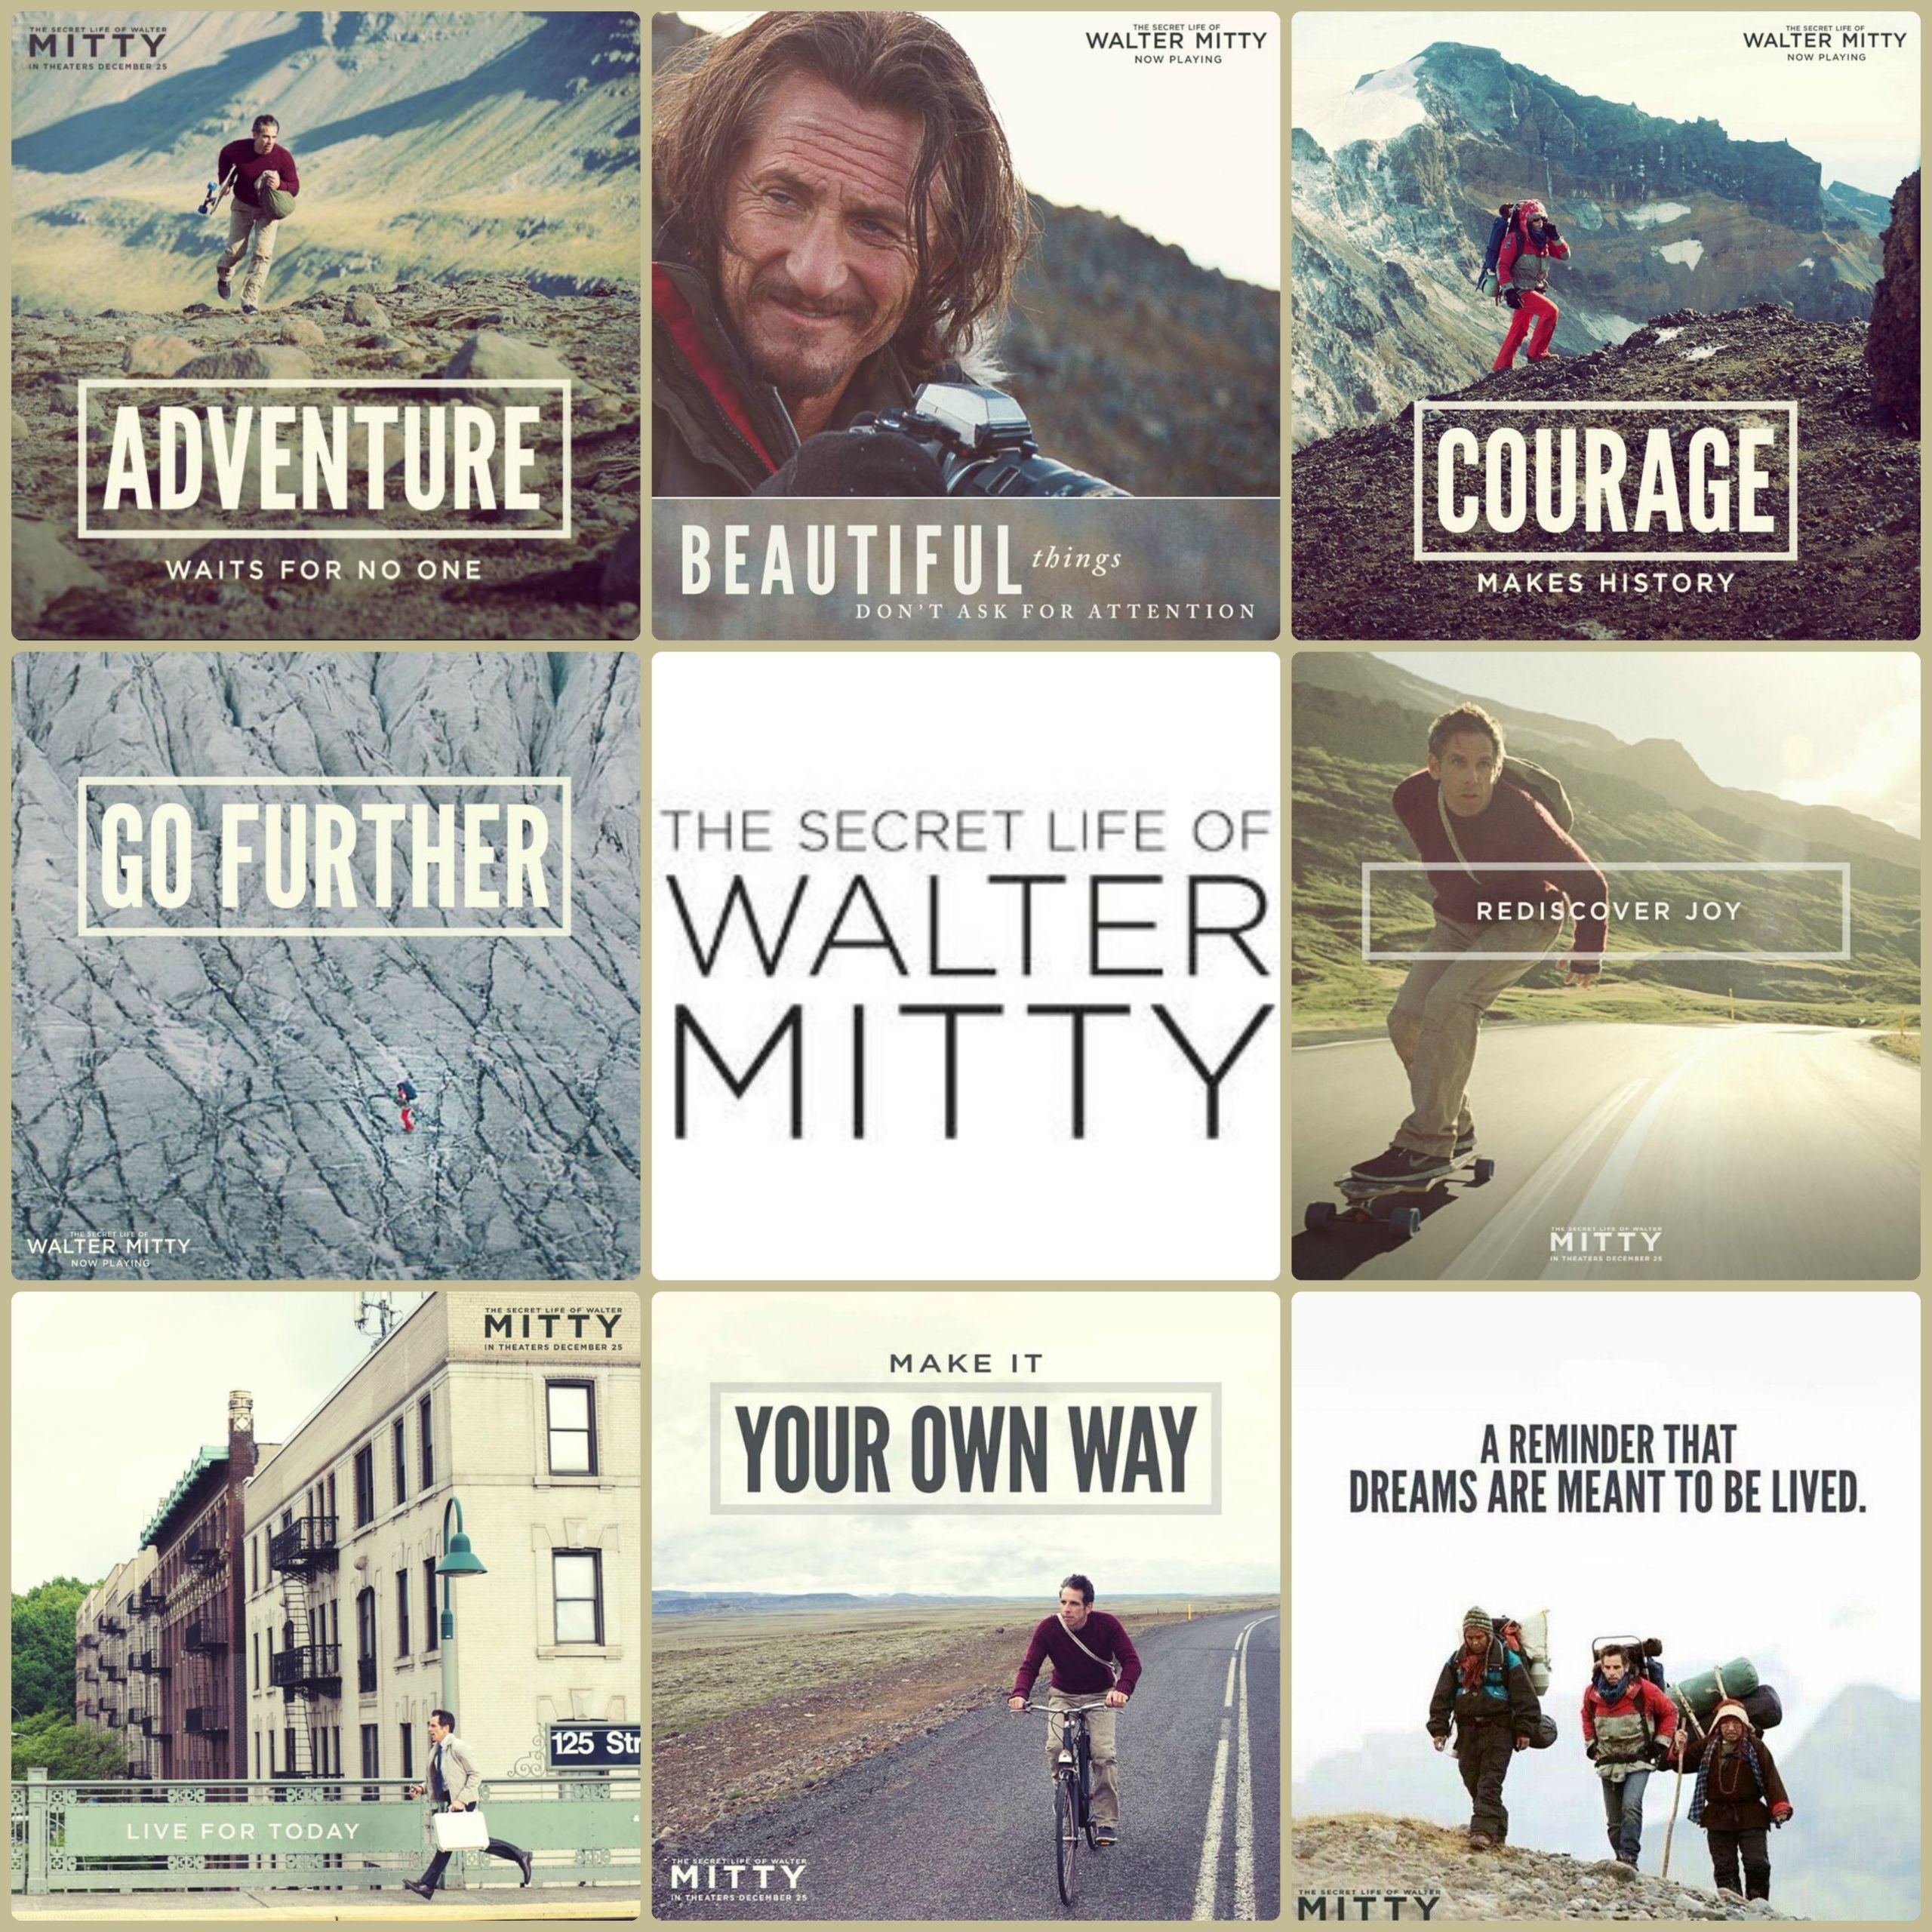 Life Magazine Quotes
 The Secret Life of Walter Mitty